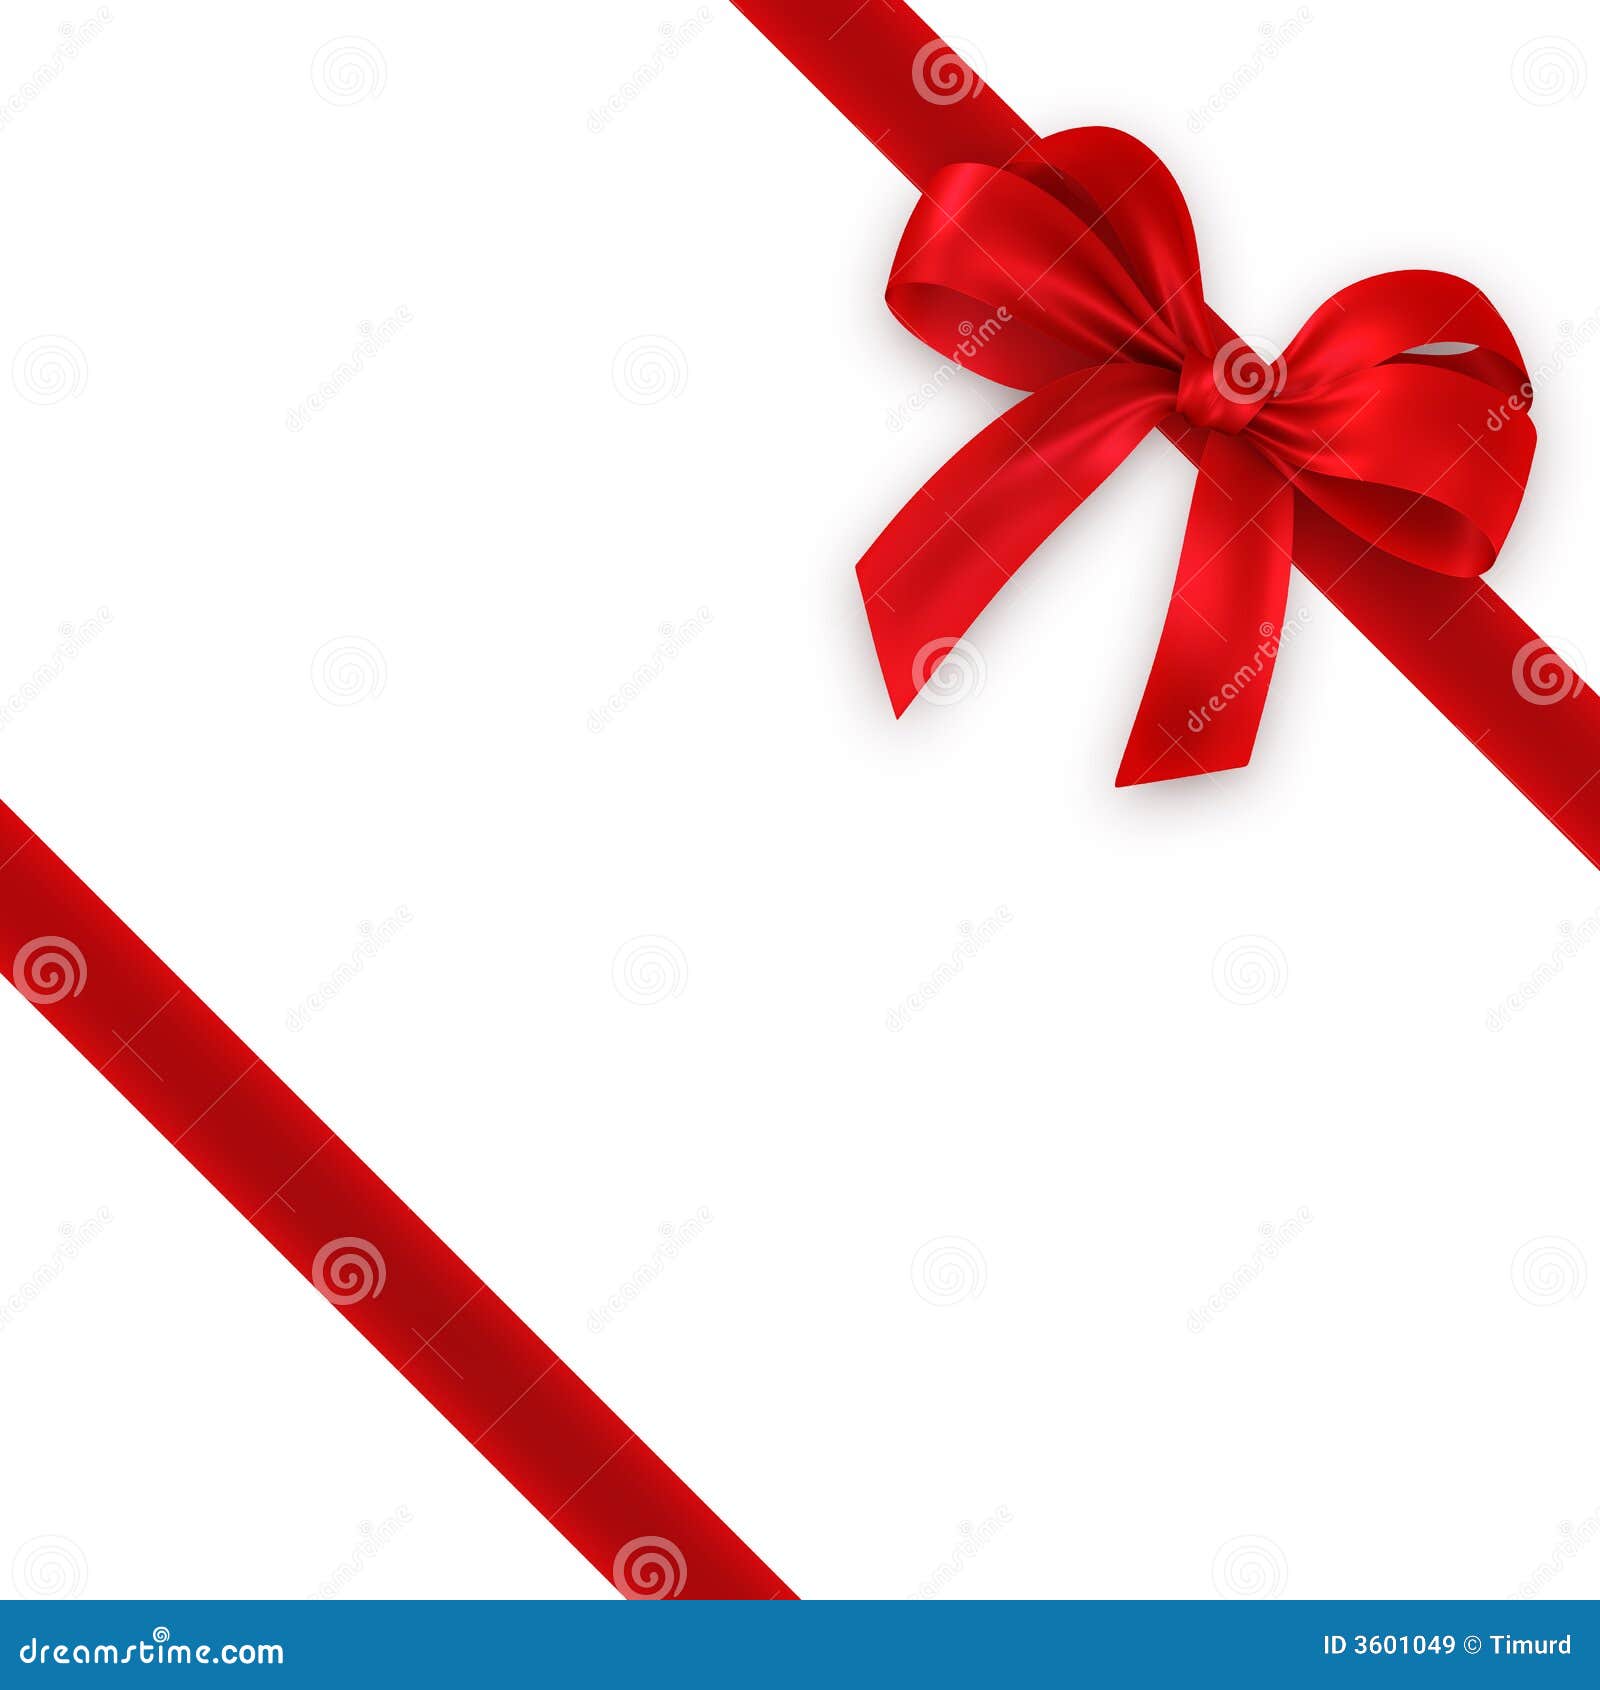 Red Gift, Ribbon, Bow Royalty Free Stock Images - Image: 3601049